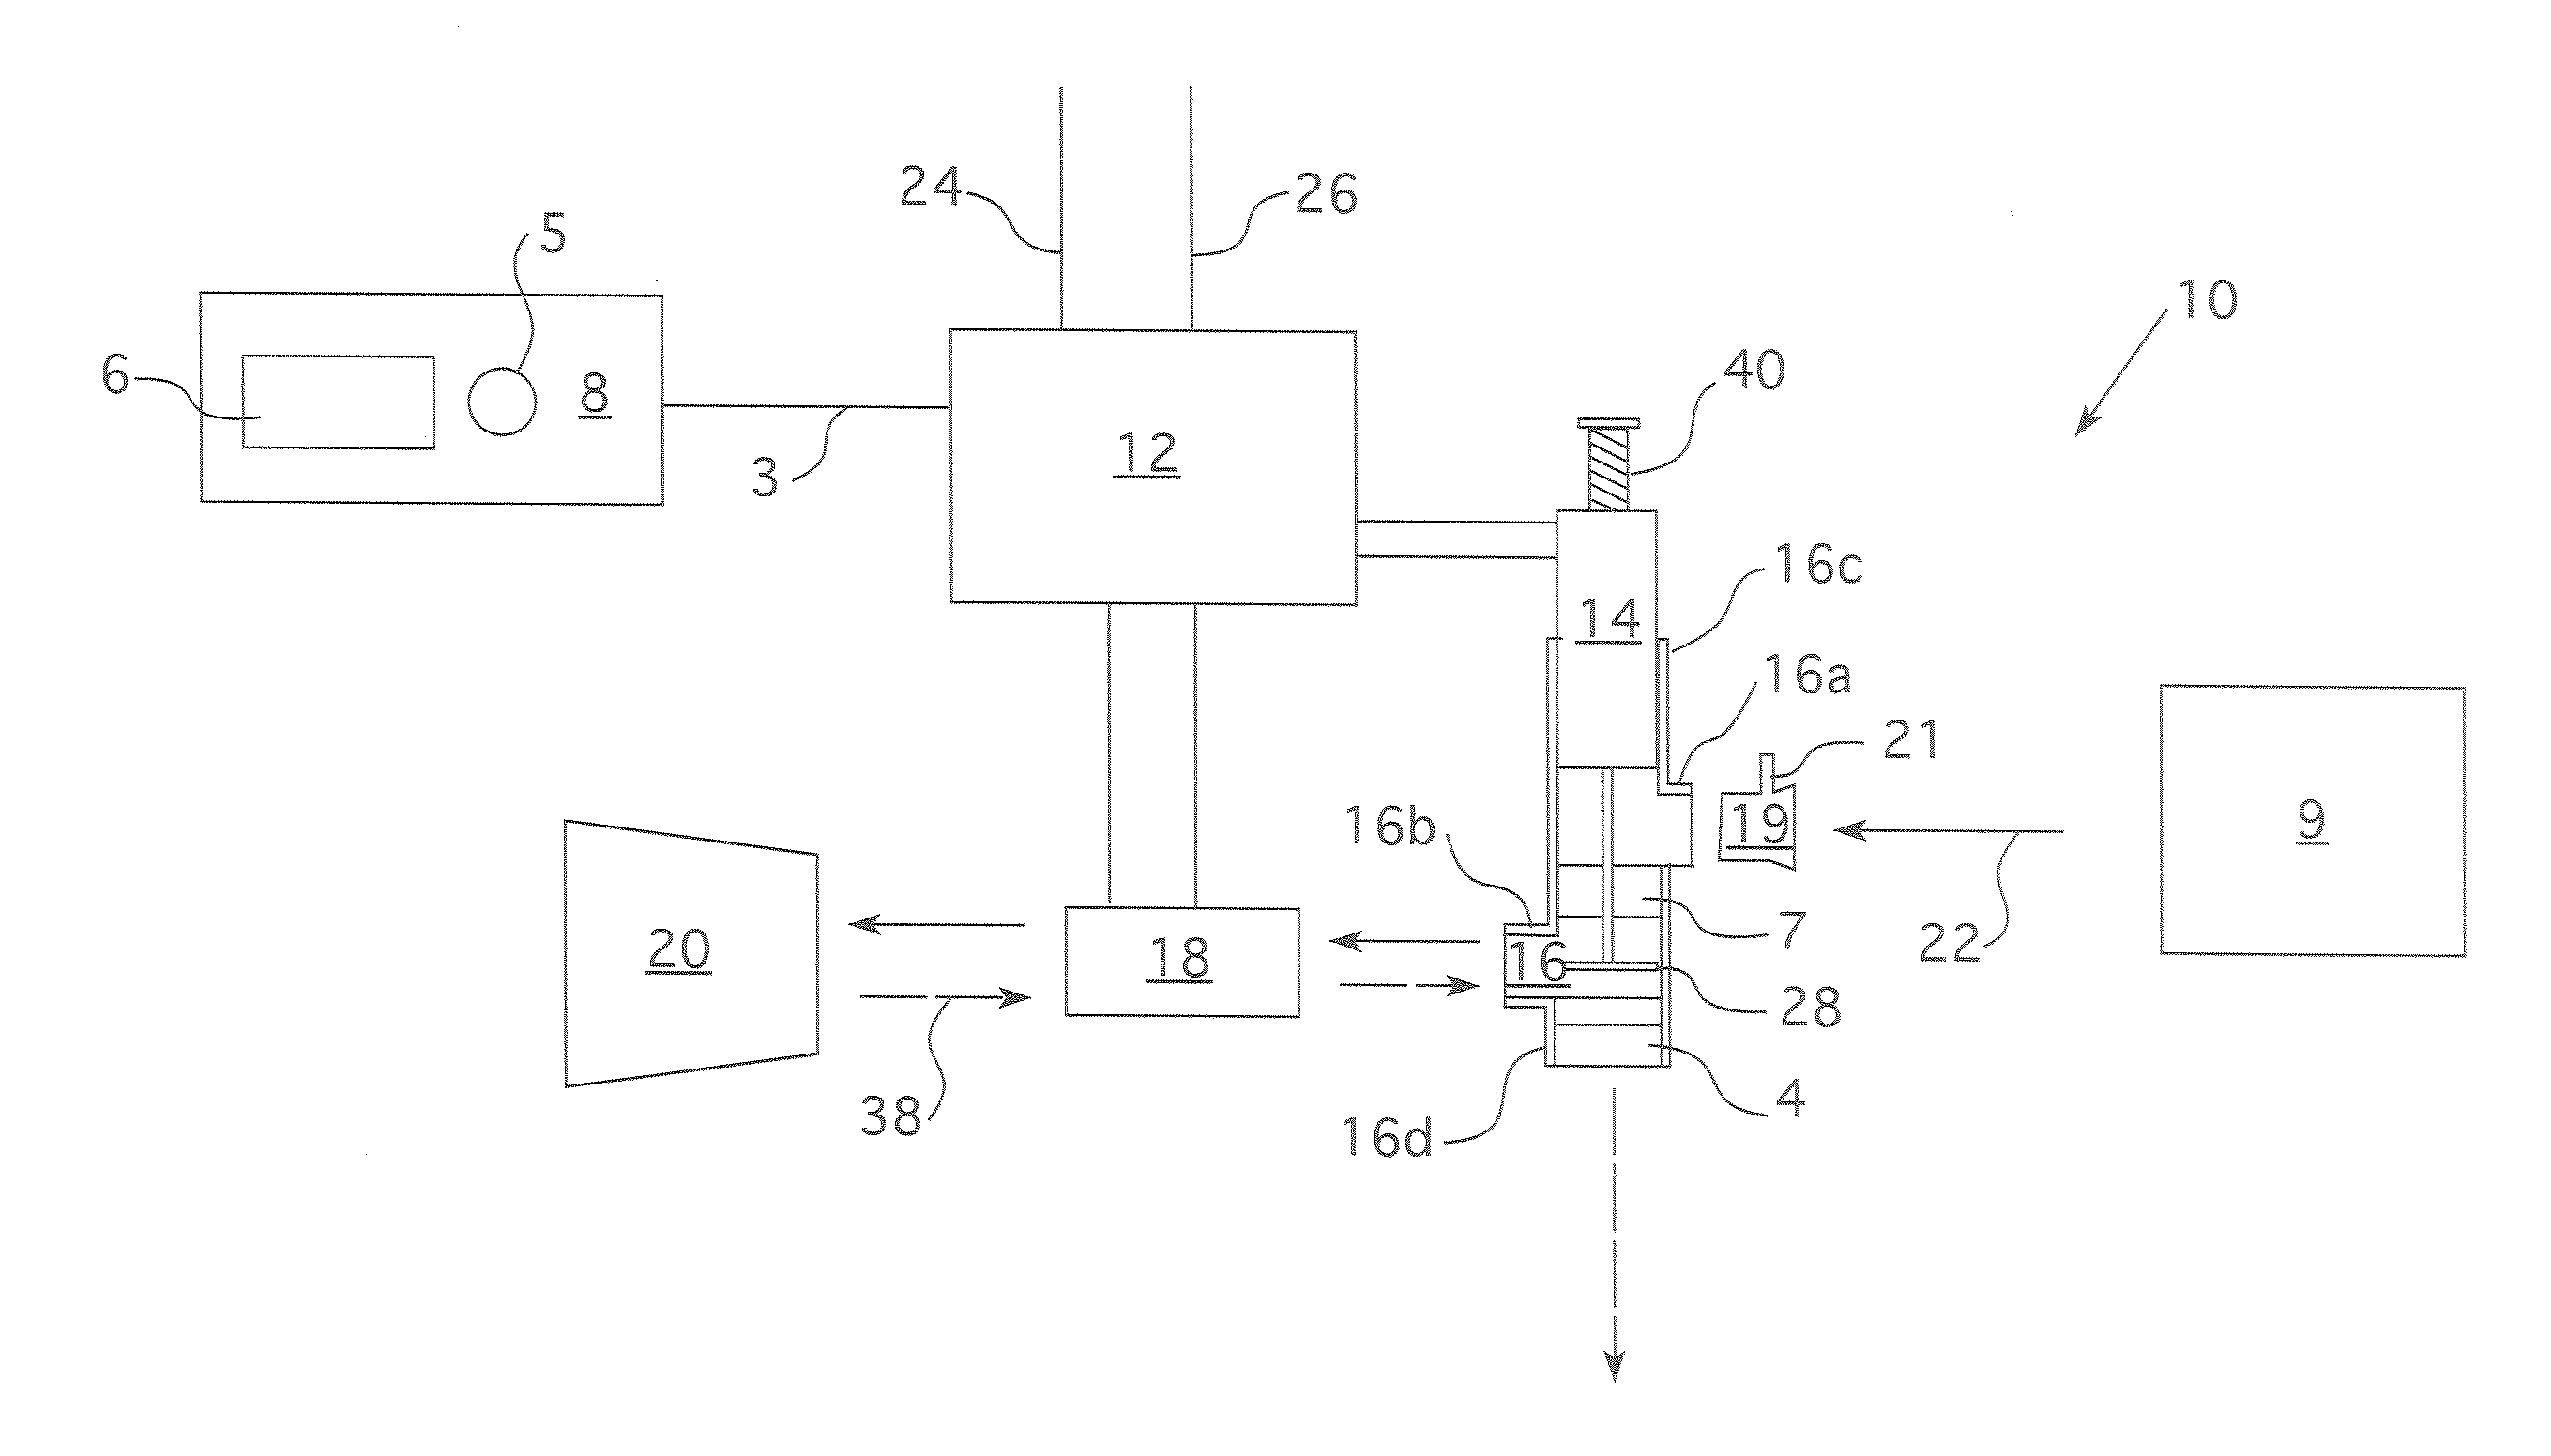 Apparatus and method for maintaining airway patency and pressure support ventilation